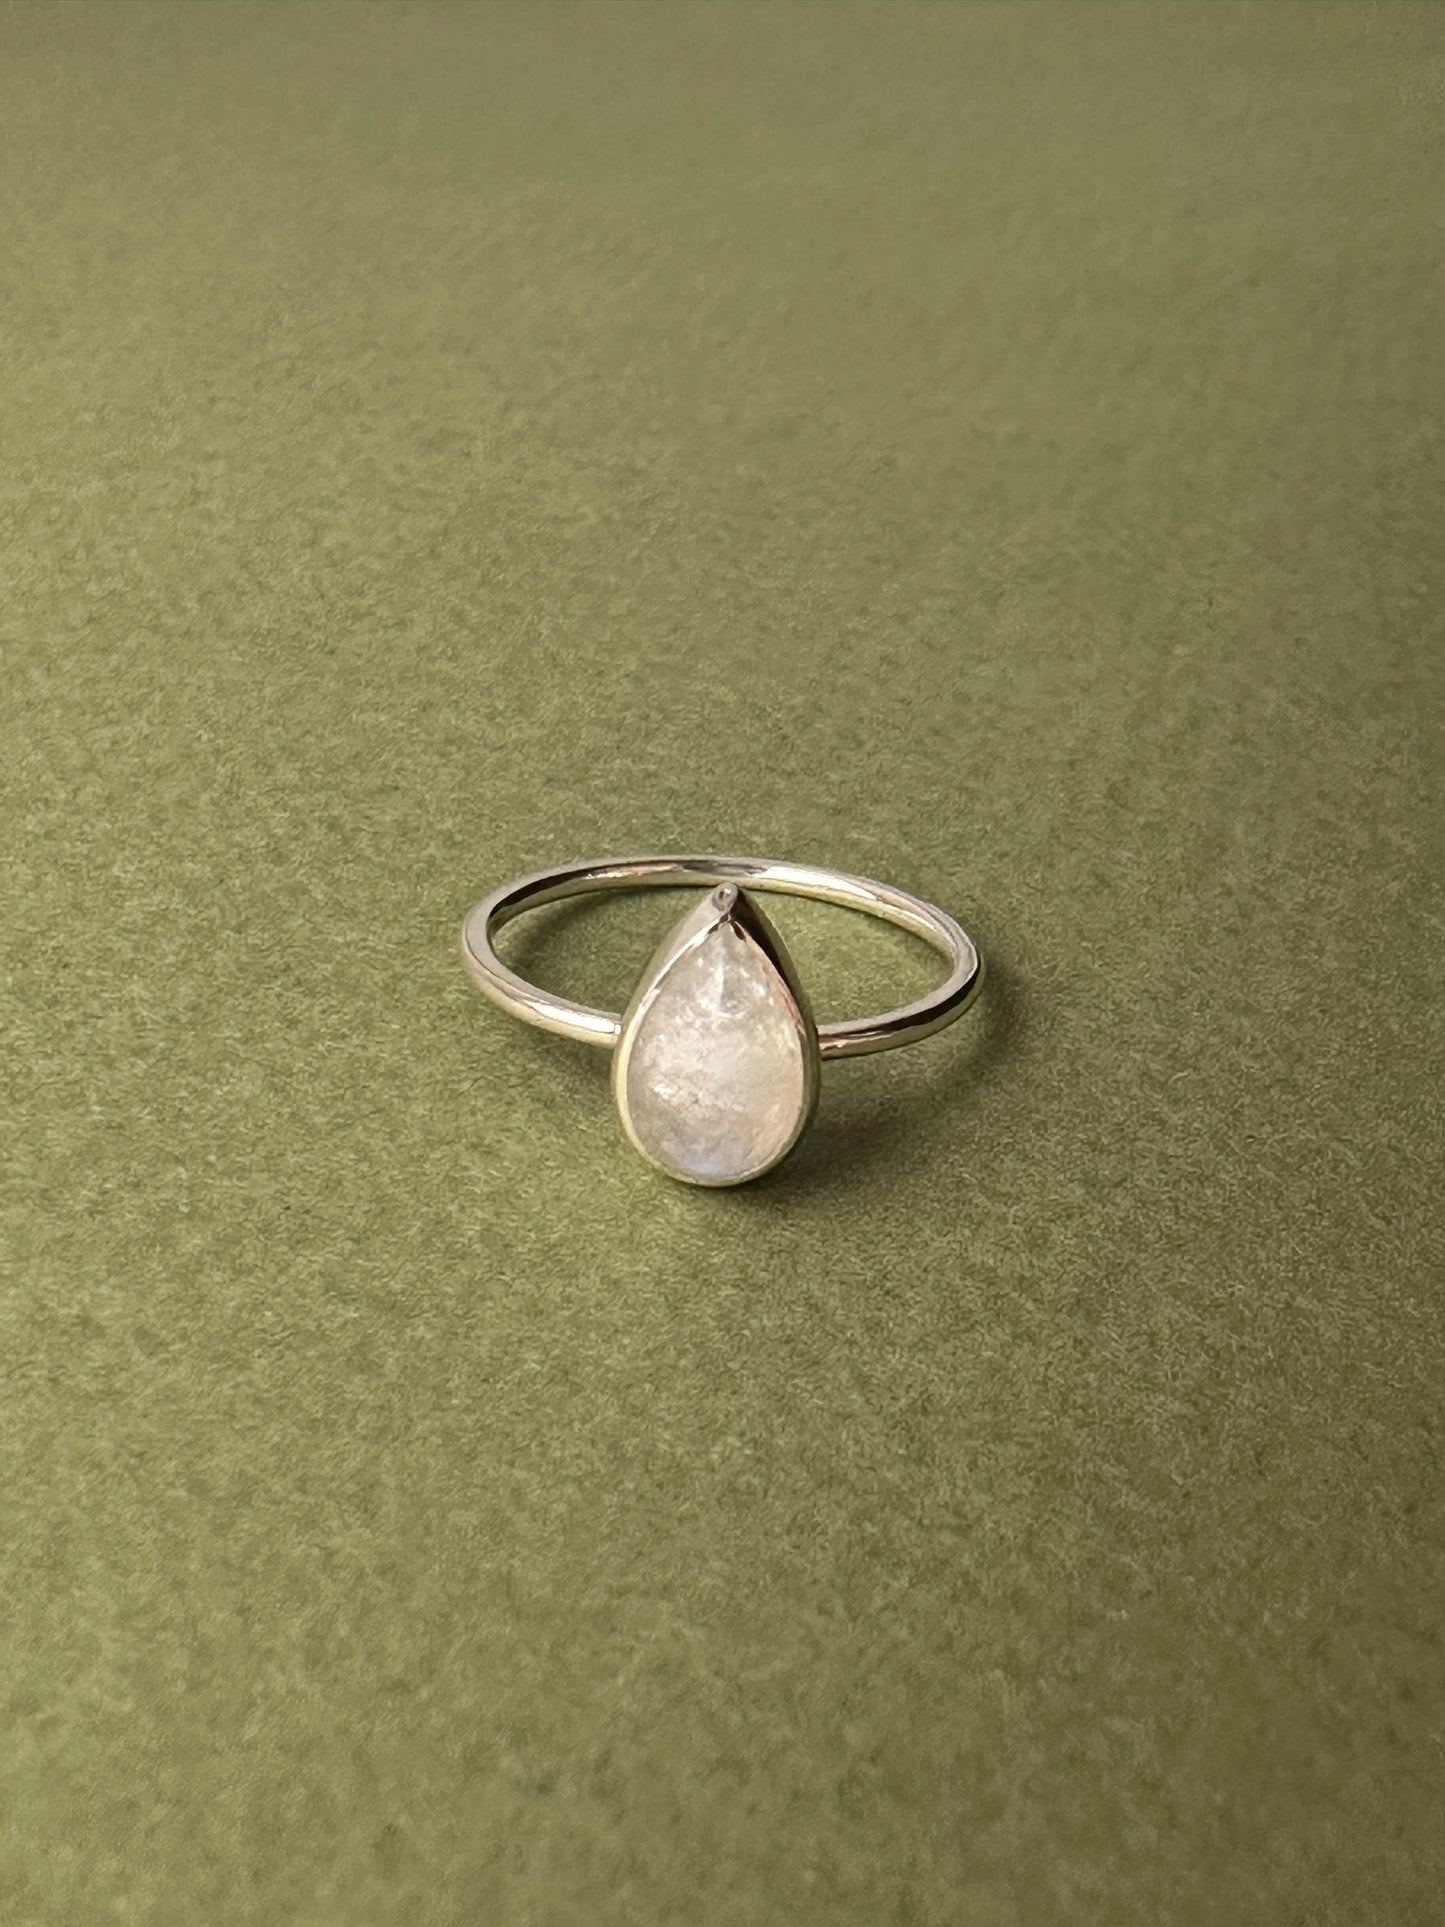 "MOON" ring in the shape of a drop